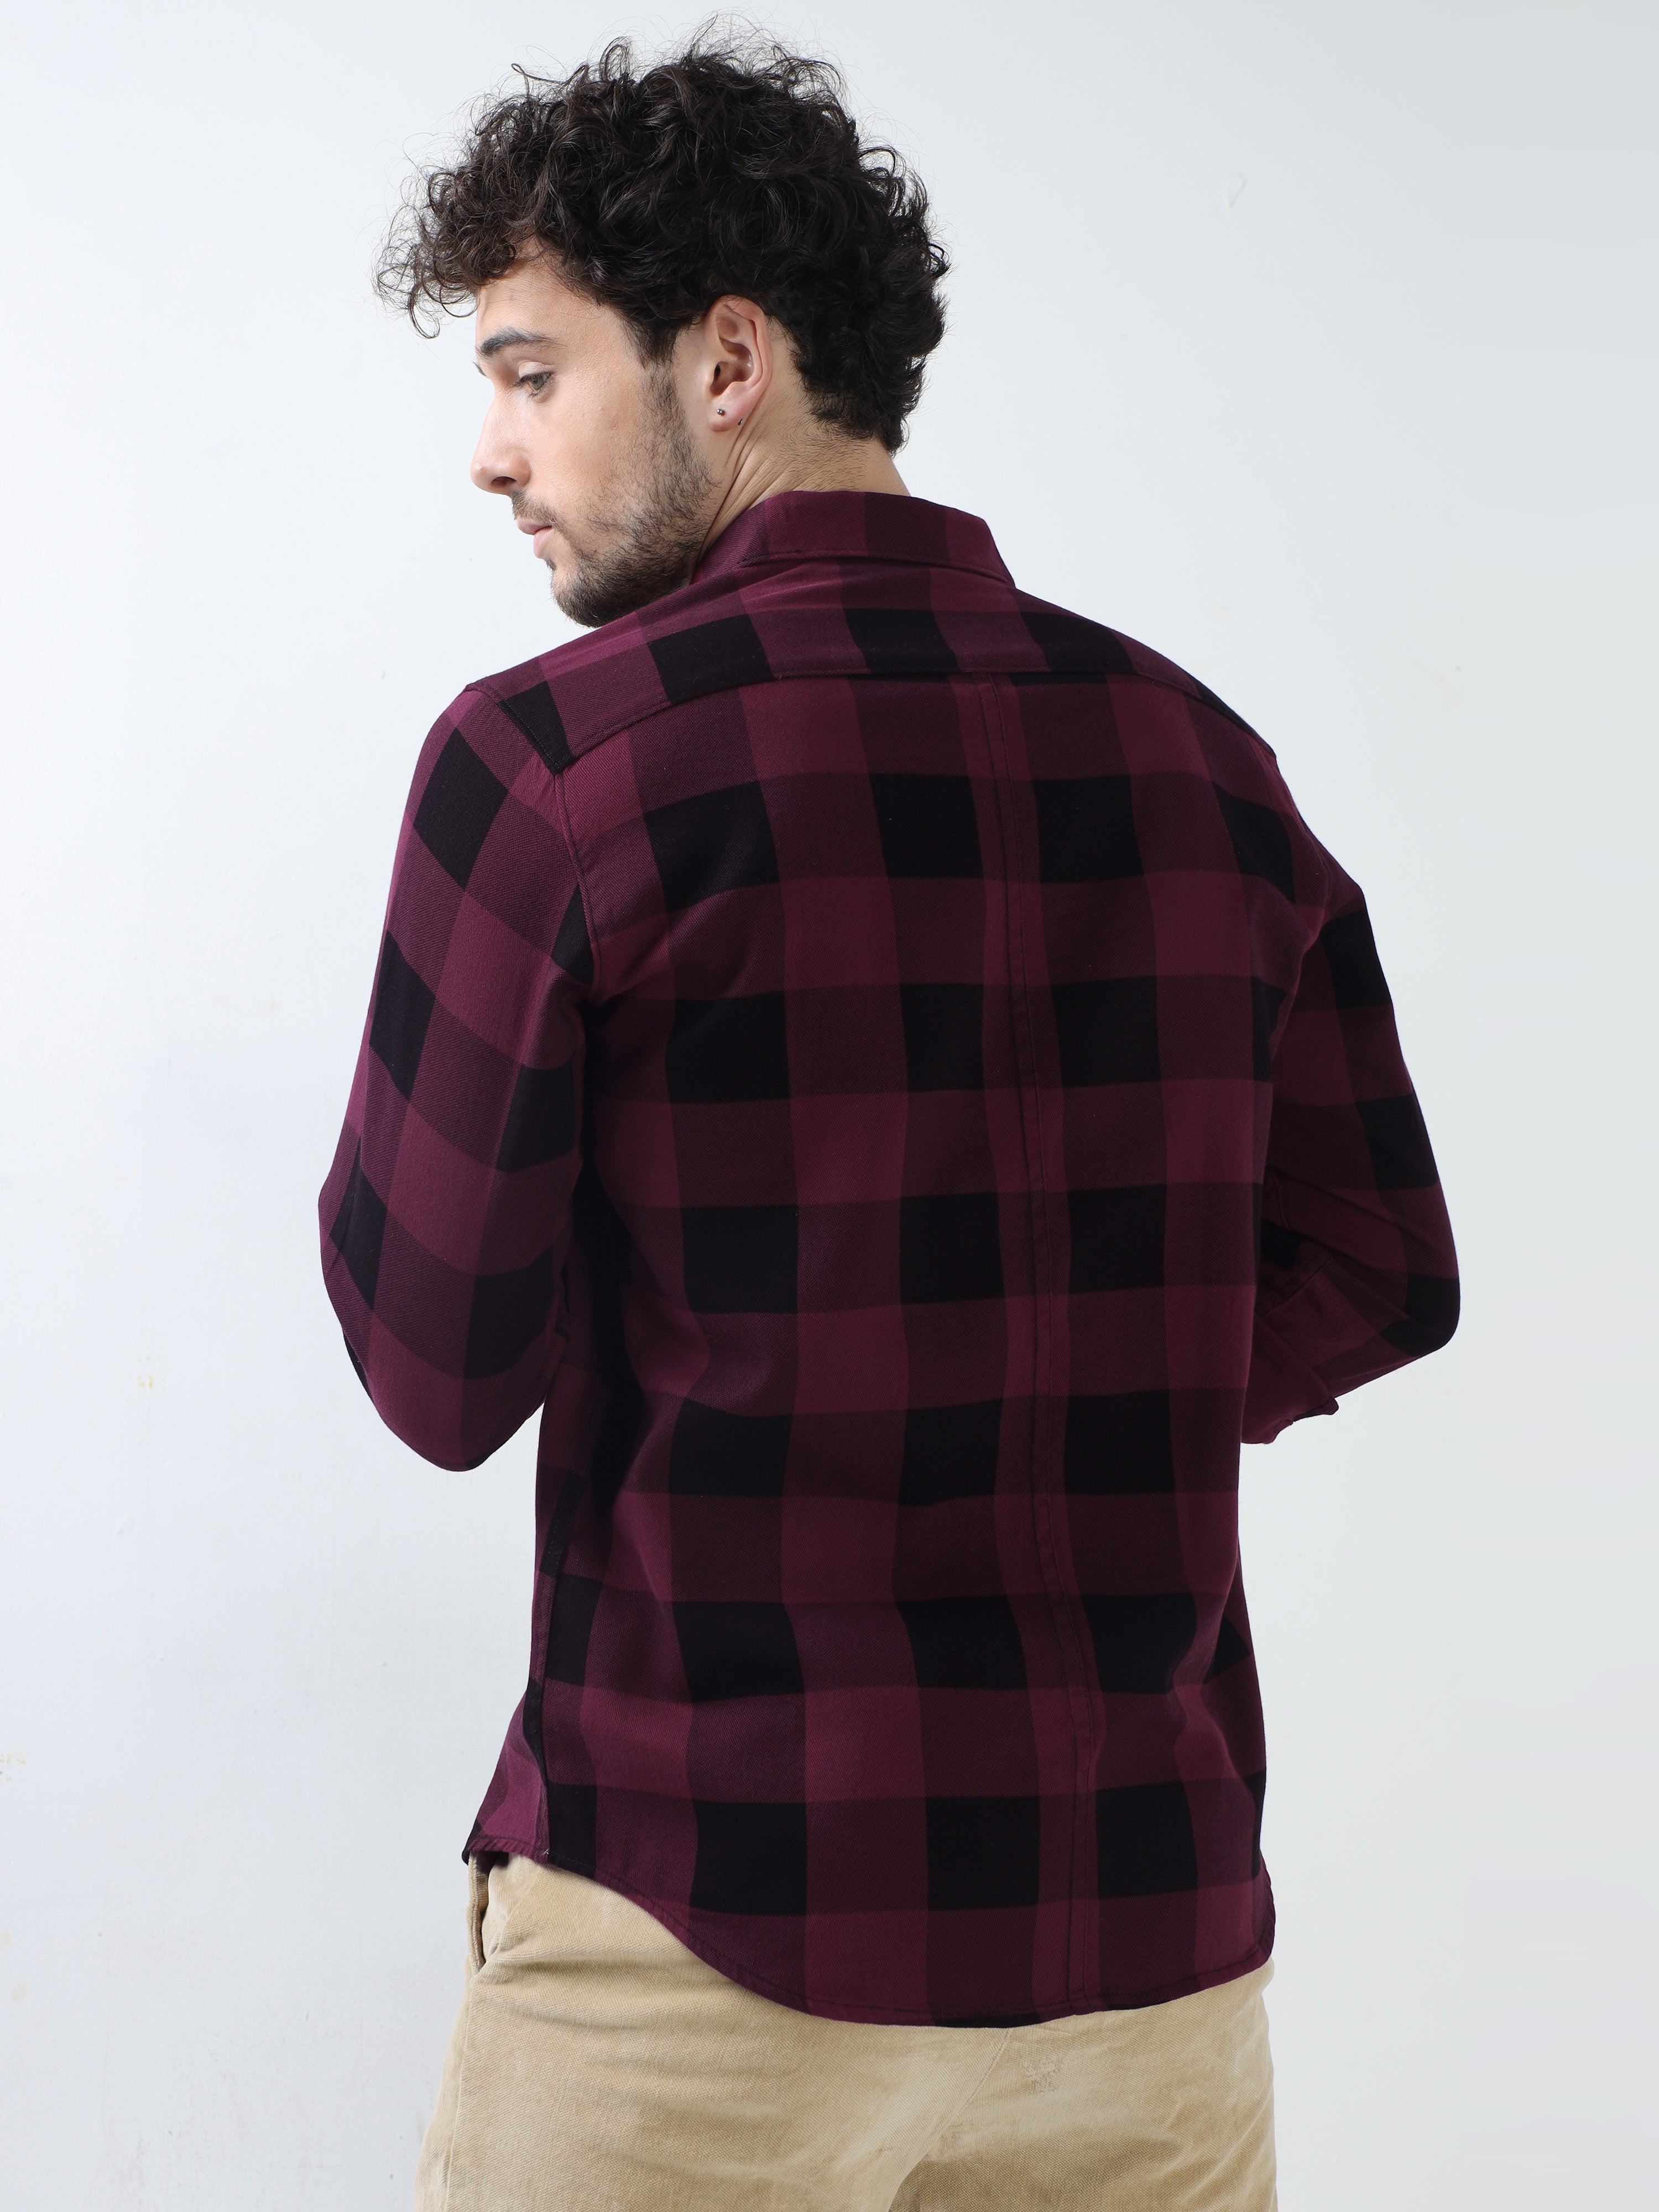 Buy Stylish red and black check shirt Online In IndiaRs. 1359.00